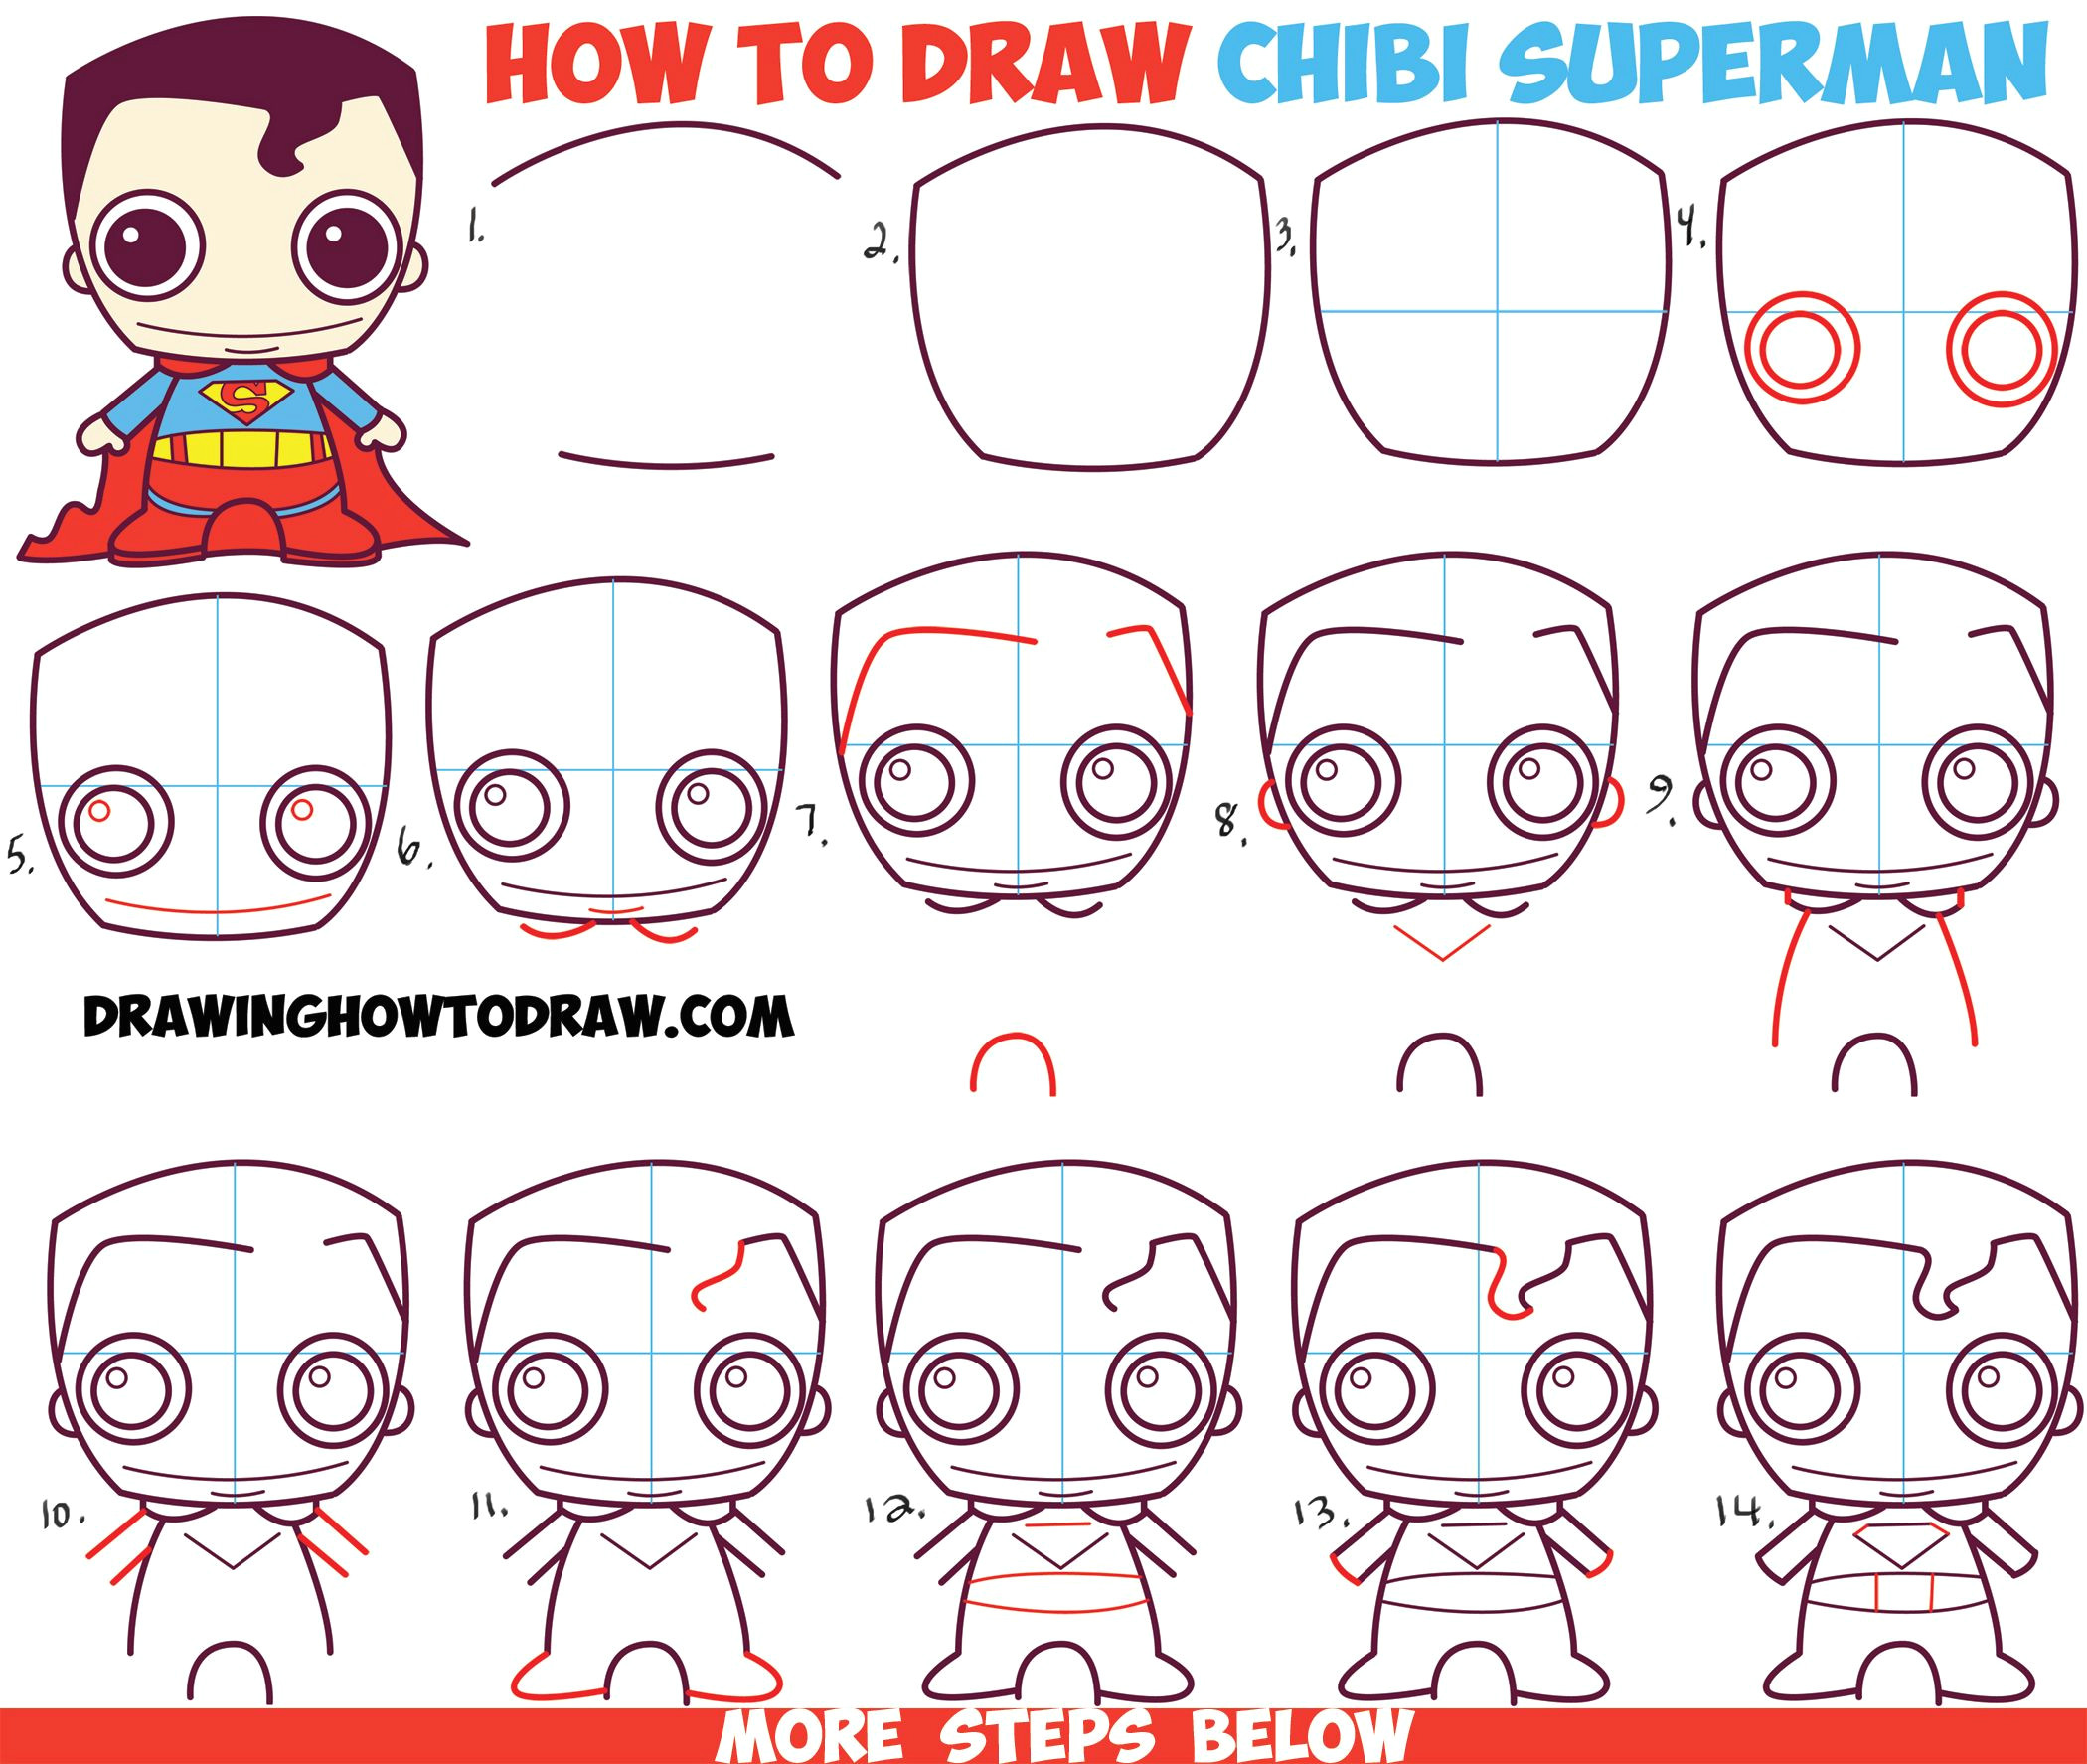 Easy Drawings by Steps How to Draw Cute Chibi Superman From Dc Comics In Easy Step by Step